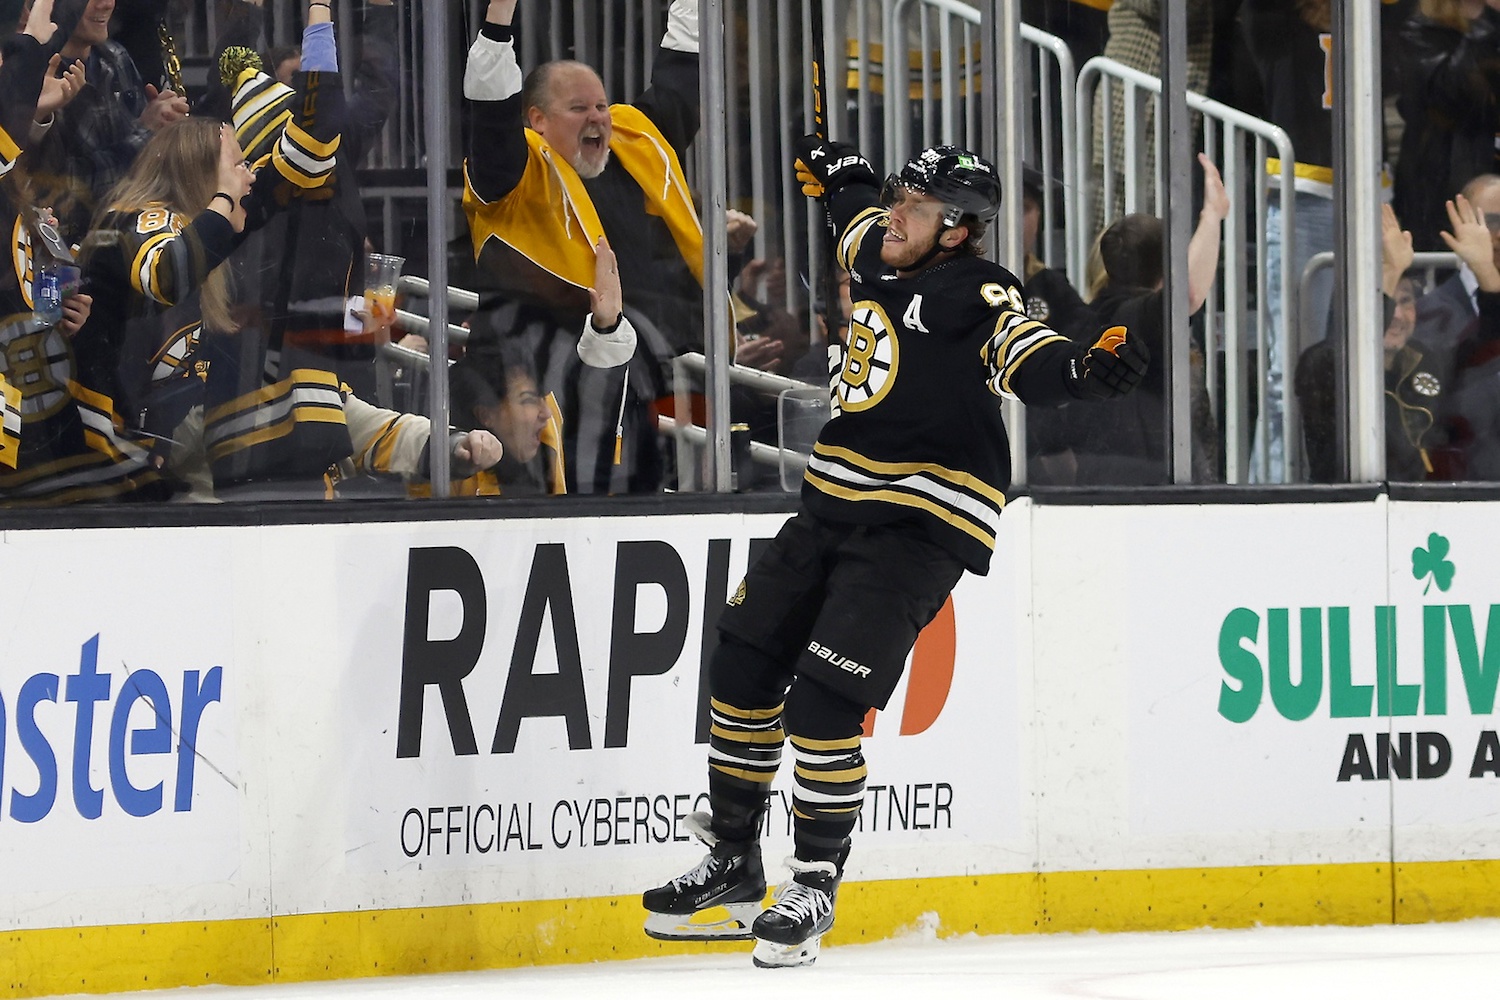 Dec 30, 2023; Boston, Massachusetts, USA; Boston Bruins right wing David Pastrnak (88) celebrates his goal against the New Jersey Devils during the second period at TD Garden. Mandatory Credit: Winslow Townson-USA TODAY Sports